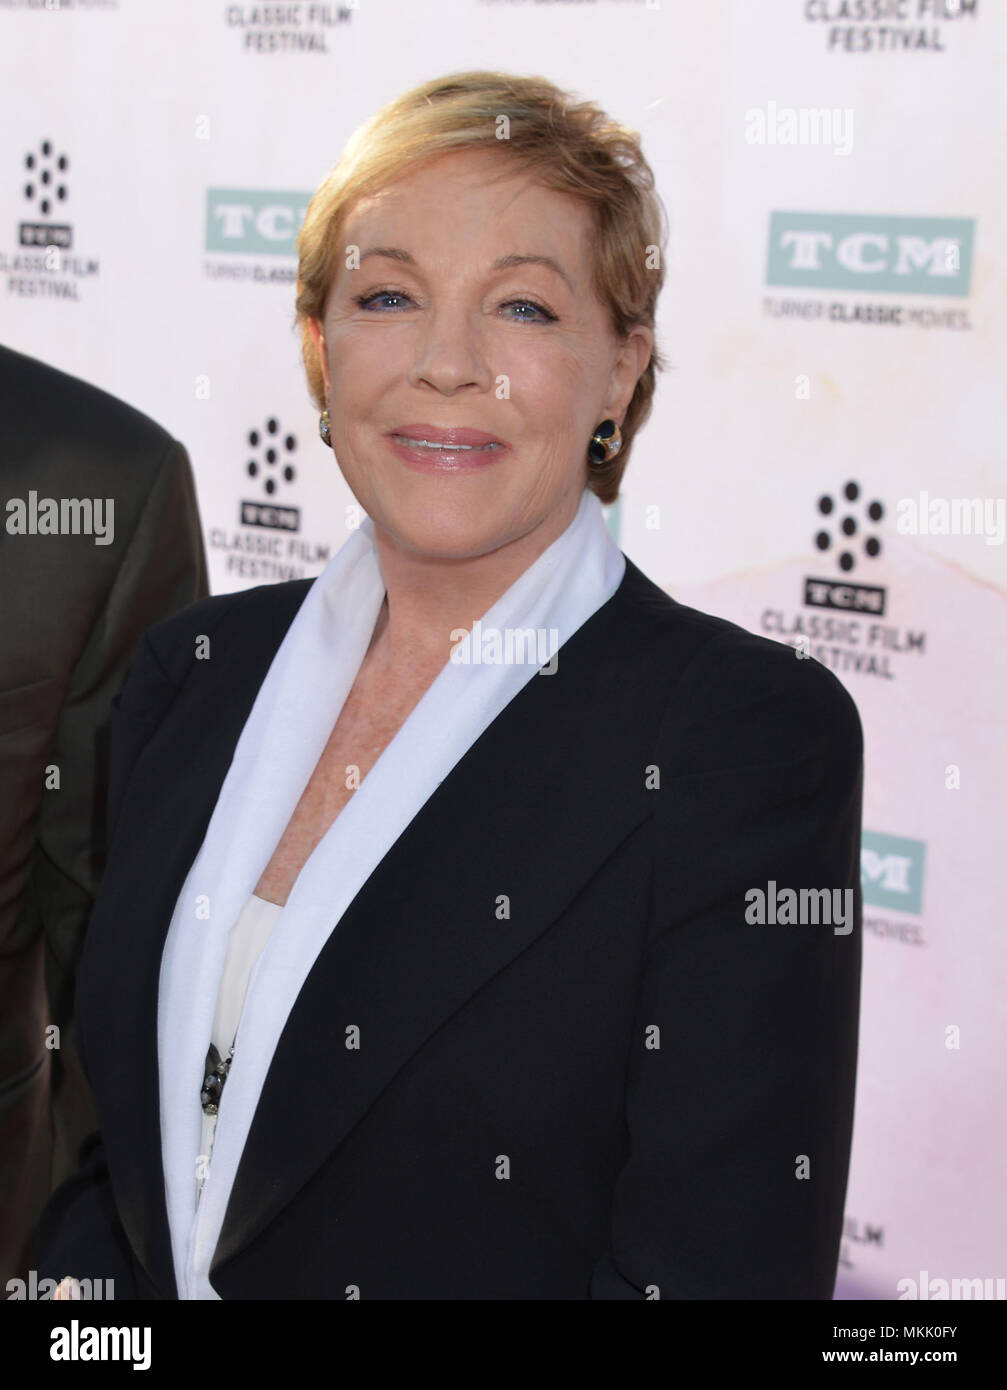 Julie Andrews 021 at The Sound Of Music Premiere at the TCL Chinese Theatre in Los Angeles. March 26, 2015.Julie Andrews 021  Event in Hollywood Life - California,  Red Carpet Event, Vertical, USA, Film Industry, Celebrities,  Photography, Bestof, Arts Culture and Entertainment, Topix Celebrities fashion / one person, Vertical, Best of, Hollywood Life, Event in Hollywood Life - California,  Red Carpet and backstage, USA, Film Industry, Celebrities,  movie celebrities, TV celebrities, Music celebrities, Photography, Bestof, Arts Culture and Entertainment,  Topix, headshot, vertical, from the ye Stock Photo